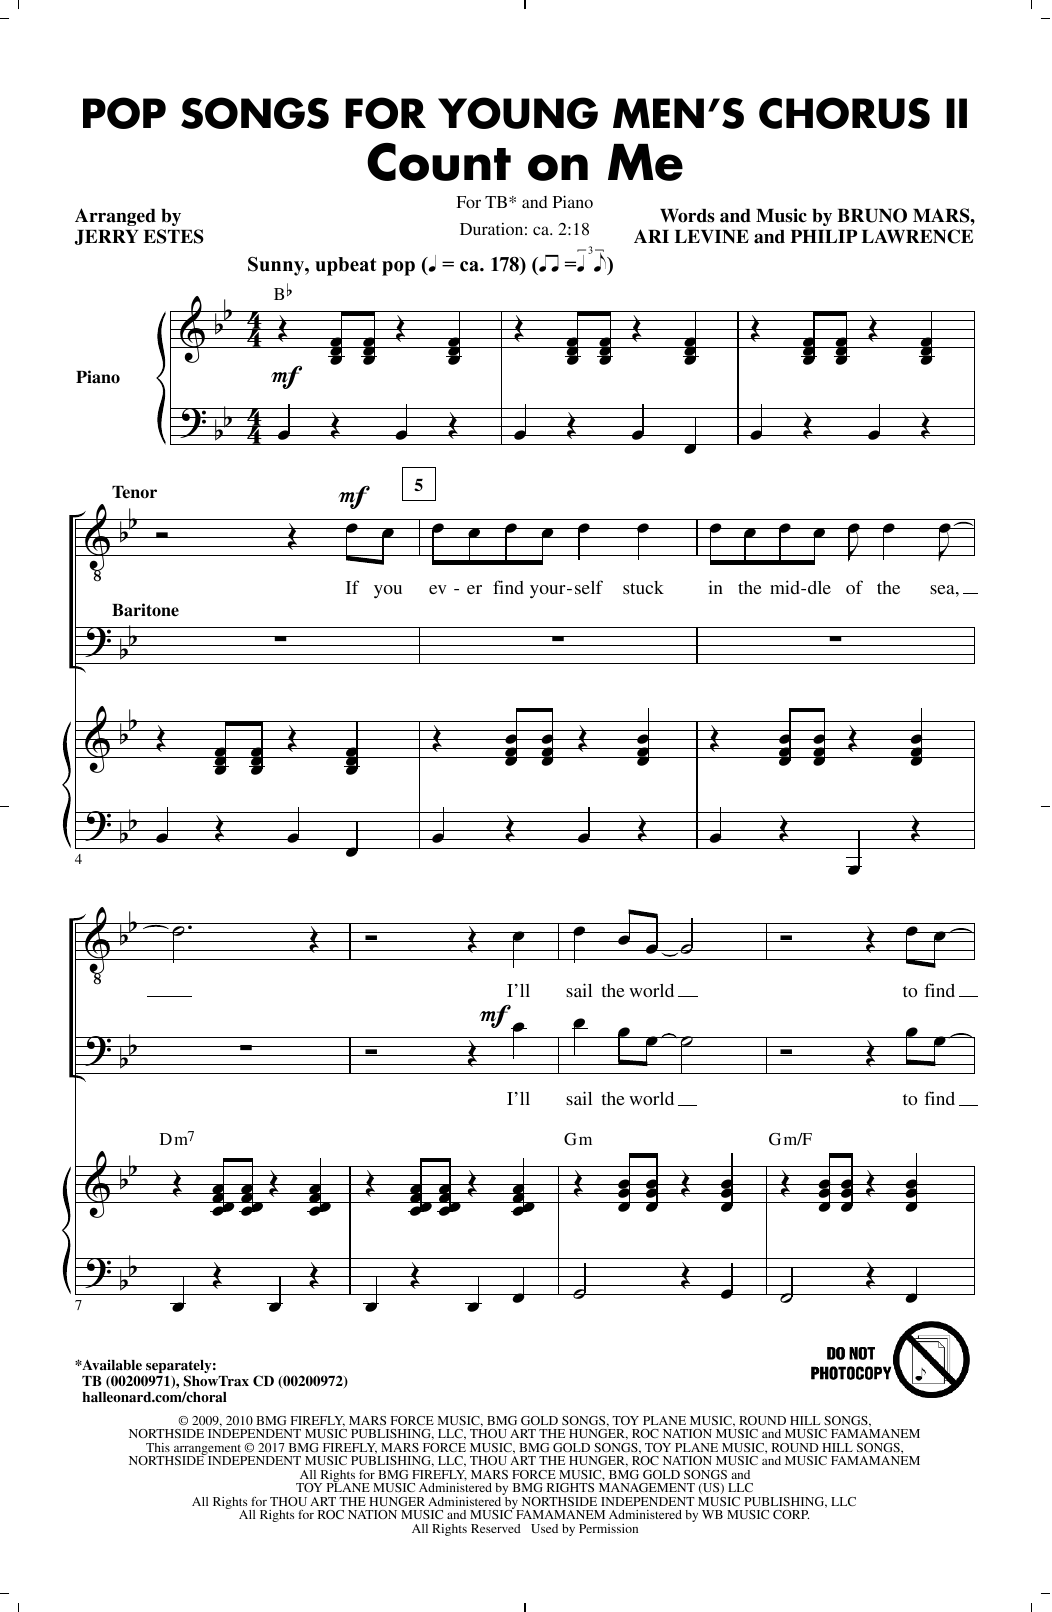 Download Jerry Estes Pop Songs for Young Men's Chorus II Sheet Music